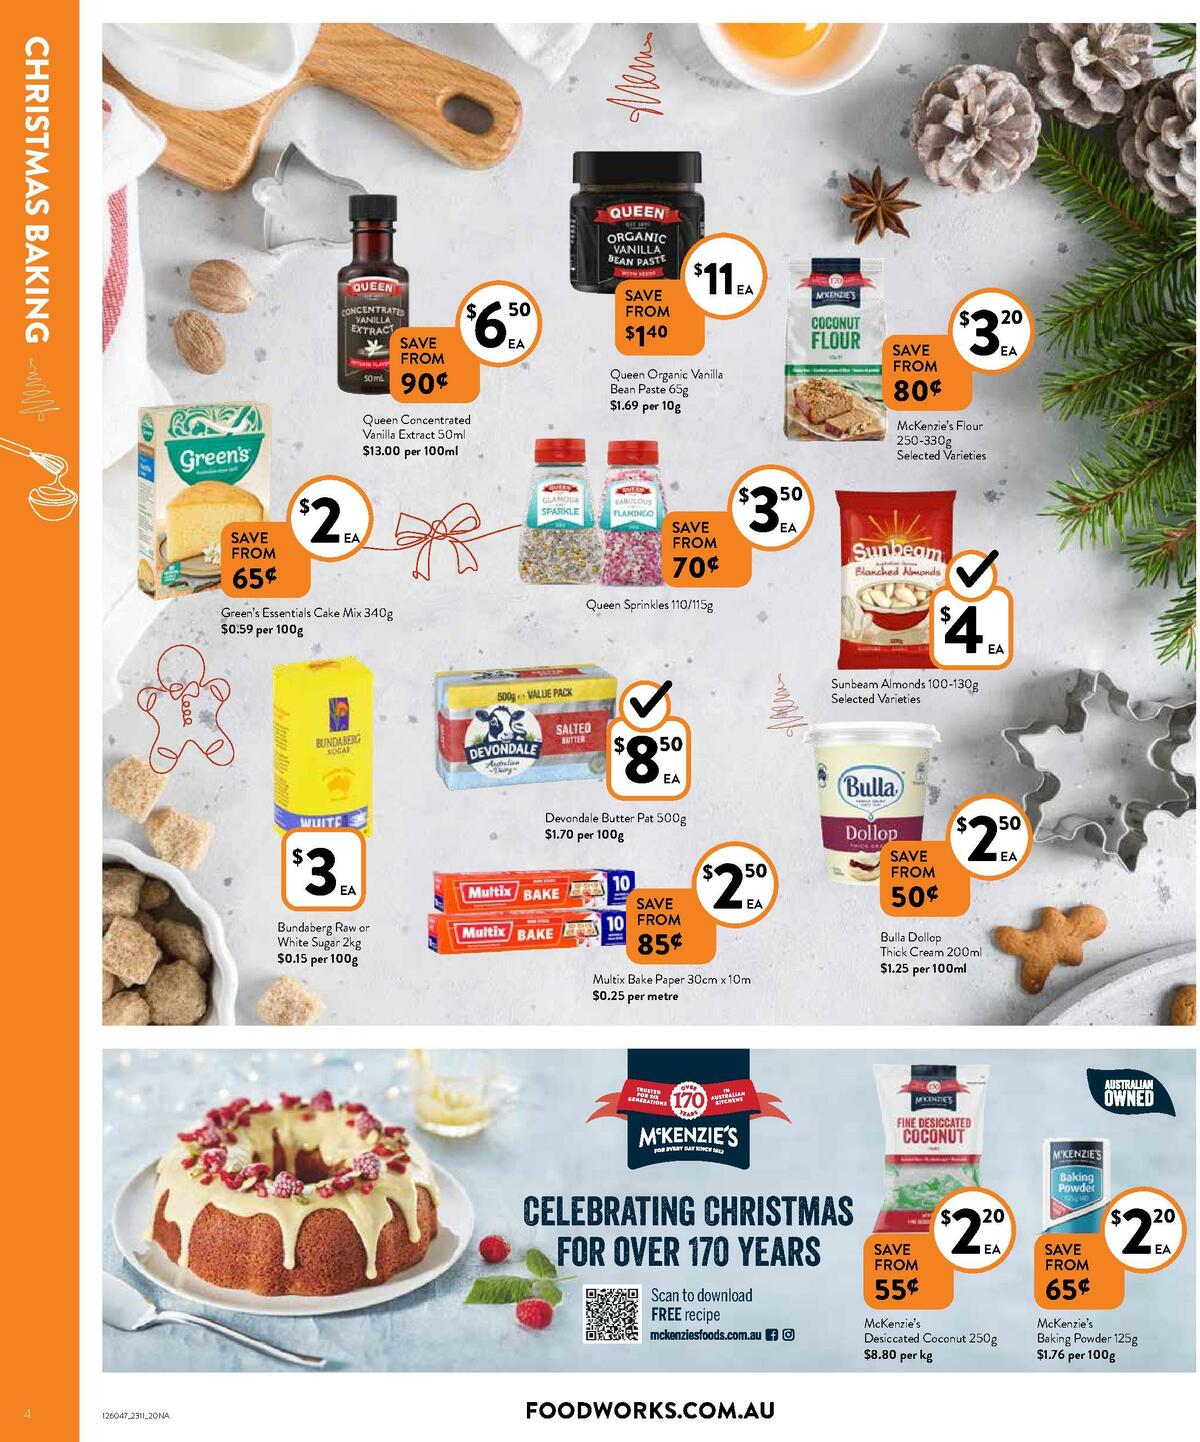 FoodWorks Supermarket Catalogues from 23 November